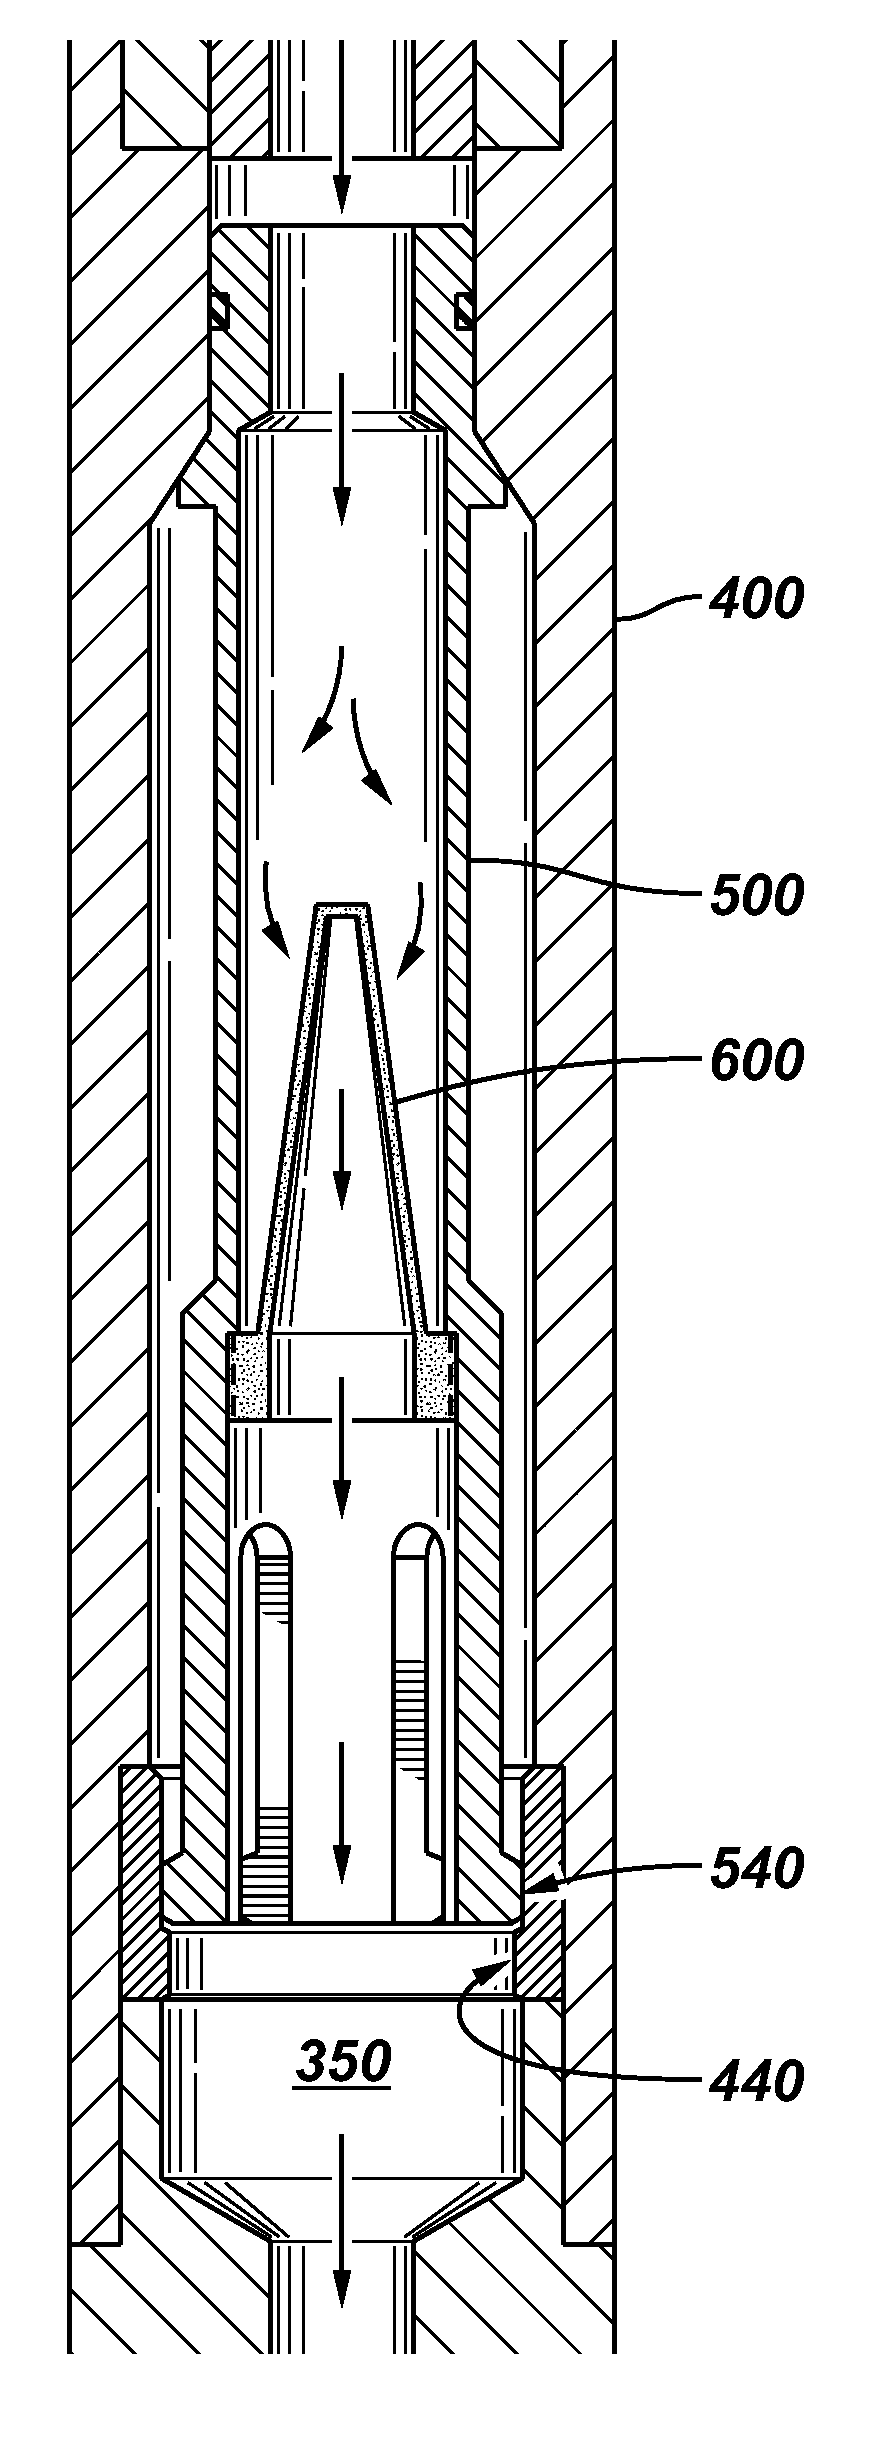 Bypass filter apparatus and method